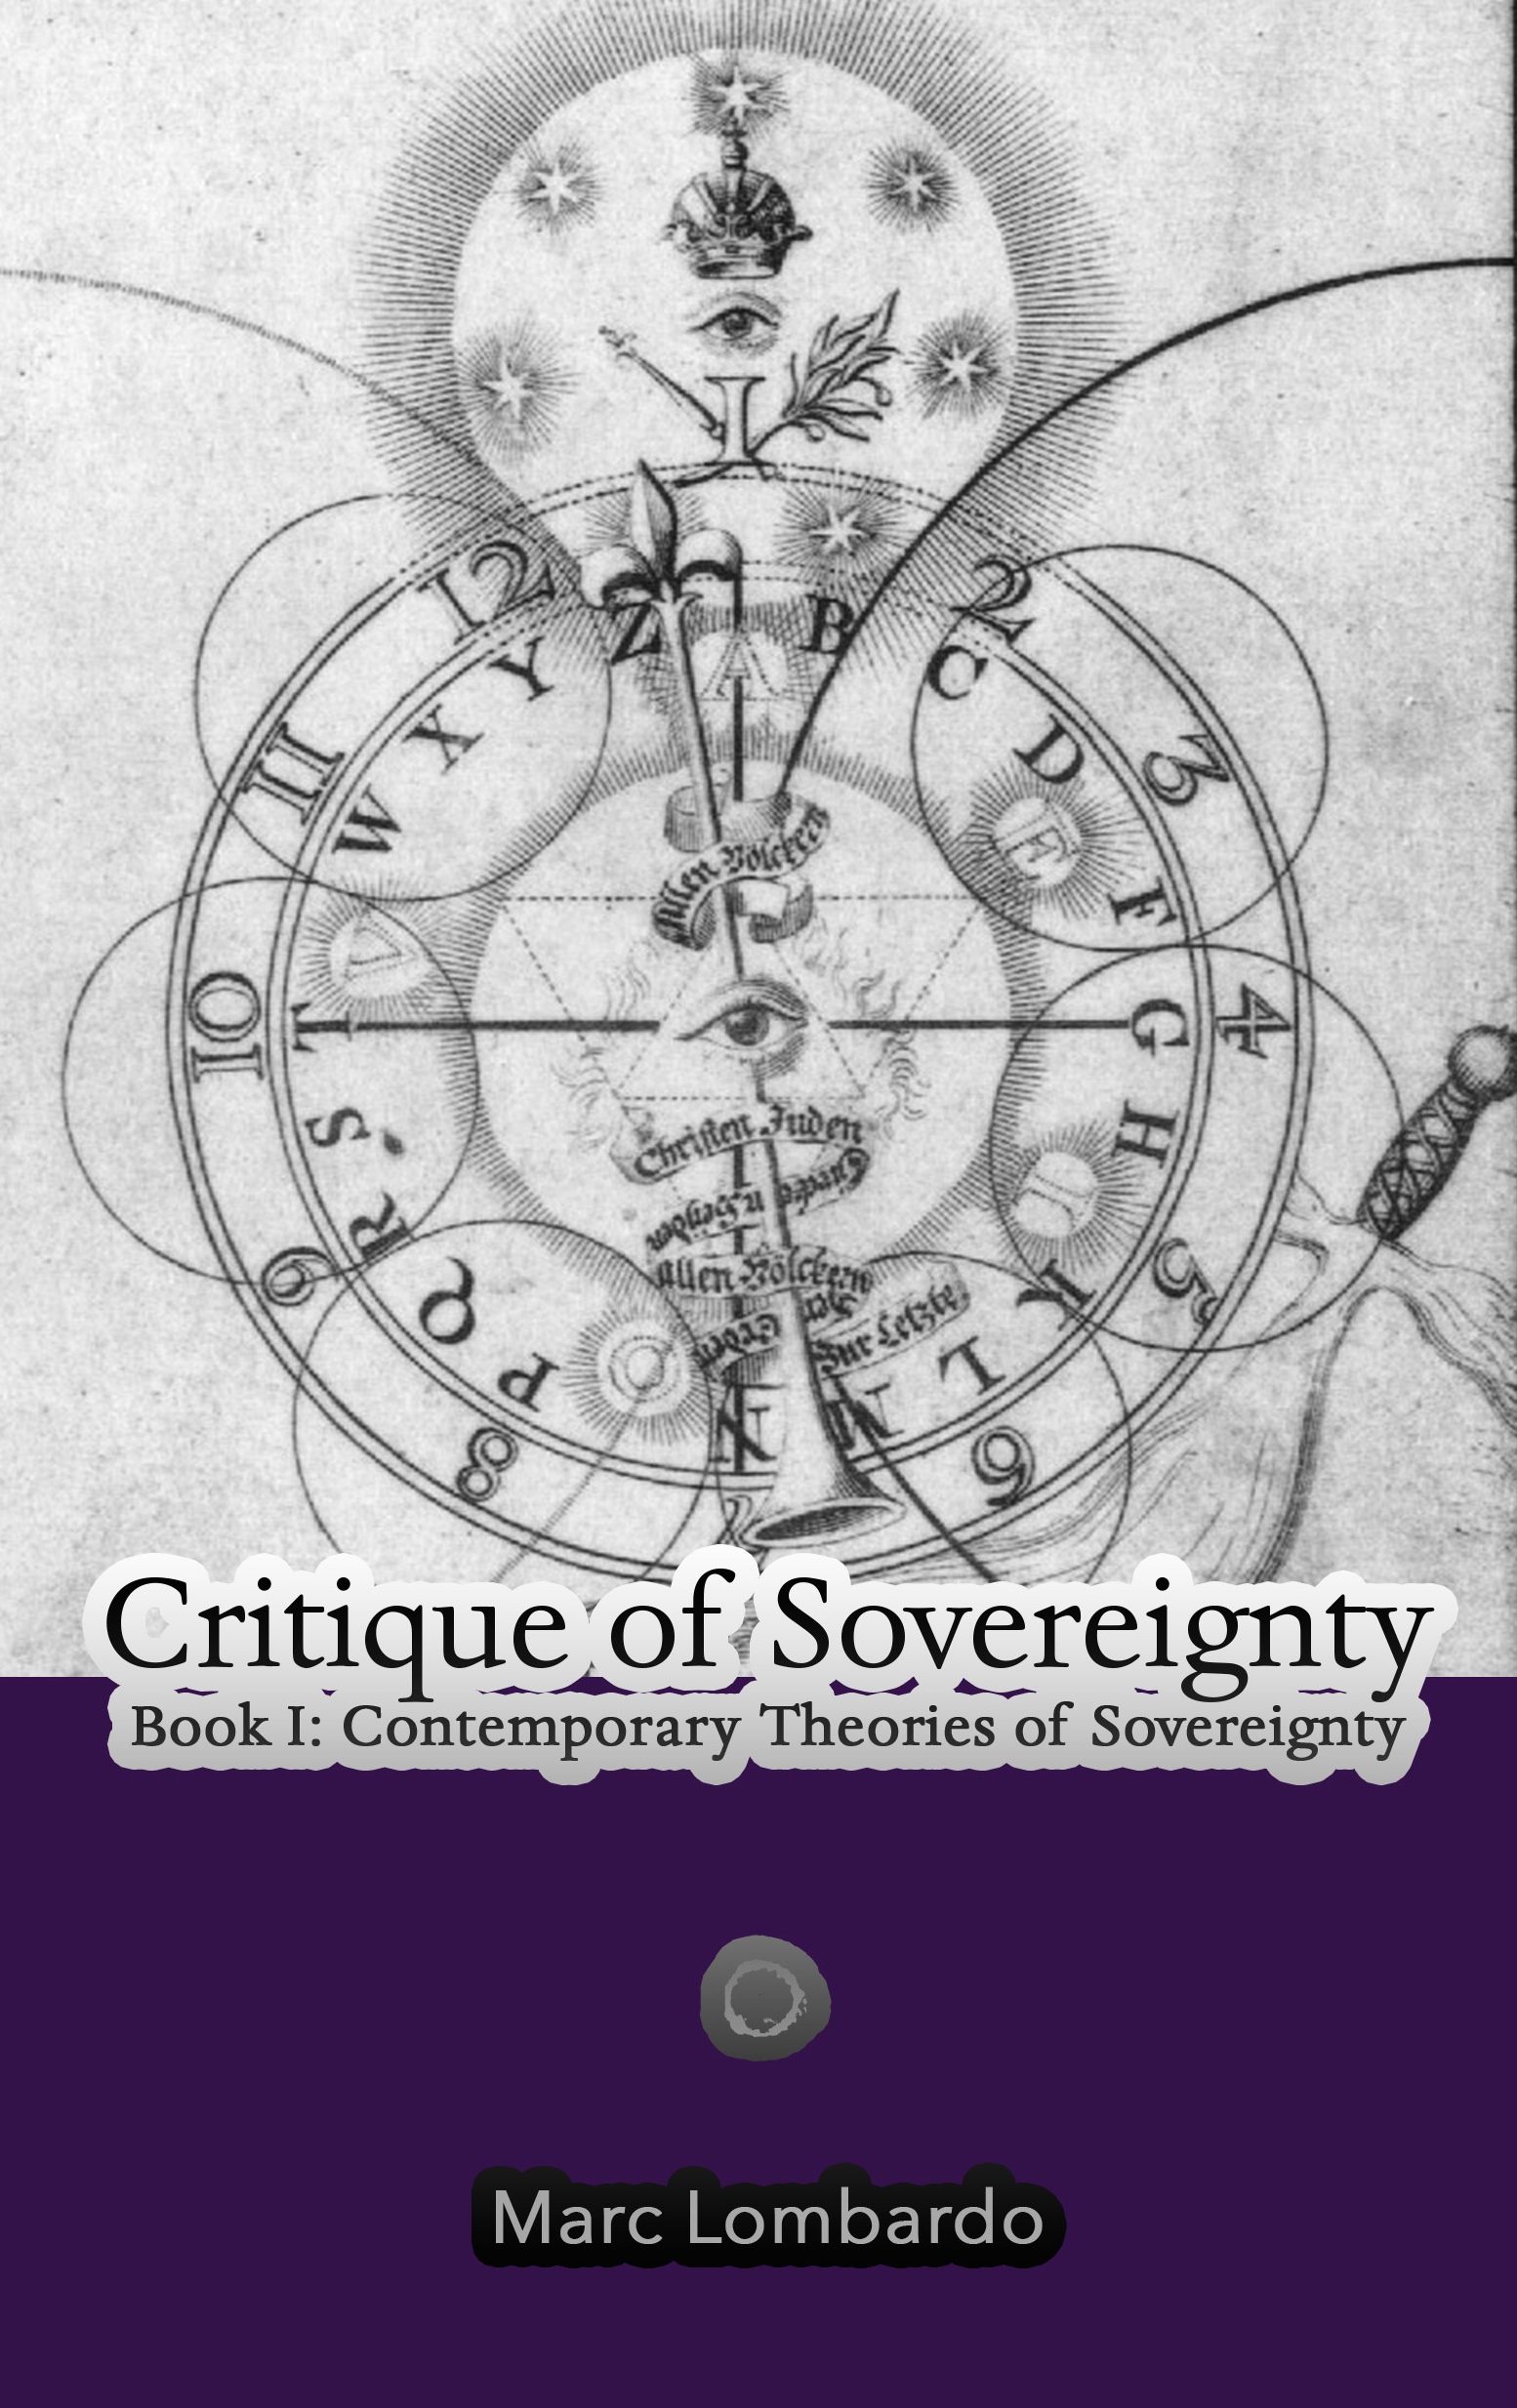 Critique of Sovereignty, Book 1: Contemporary Theories of Sovereignty (punctum books, 2015)